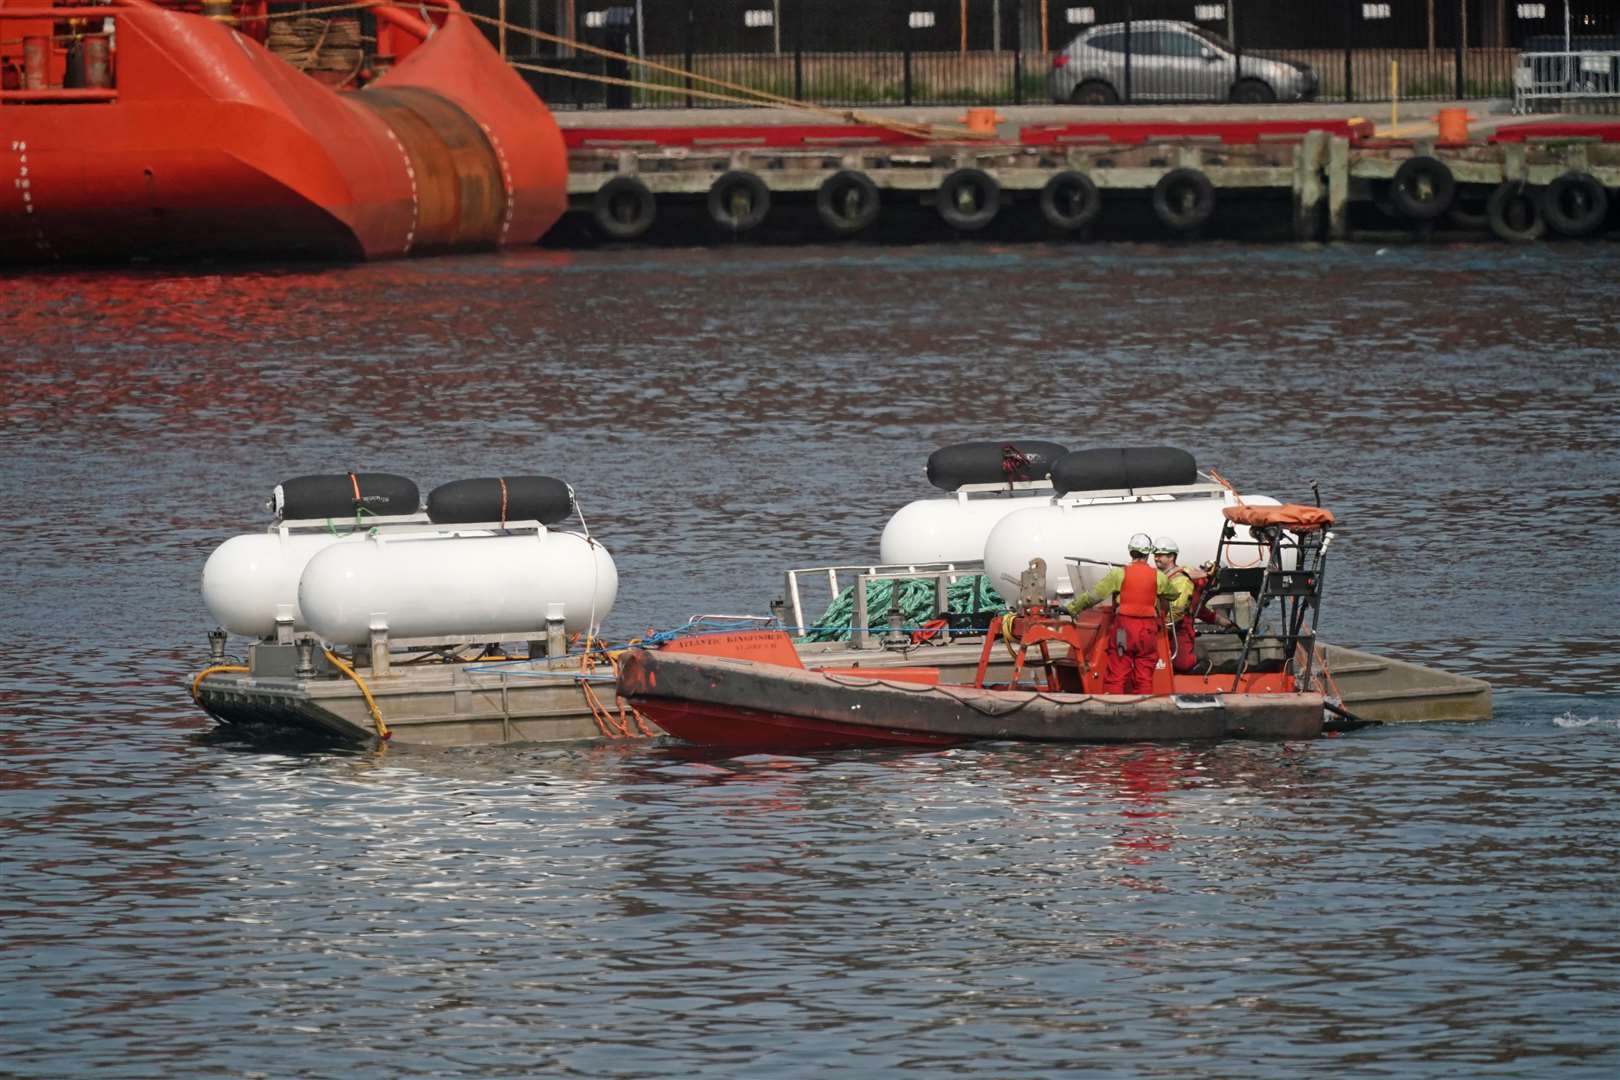 The launch platform used for the Titan submersible is towed at the port of St. John’s in Newfoundland (PA)